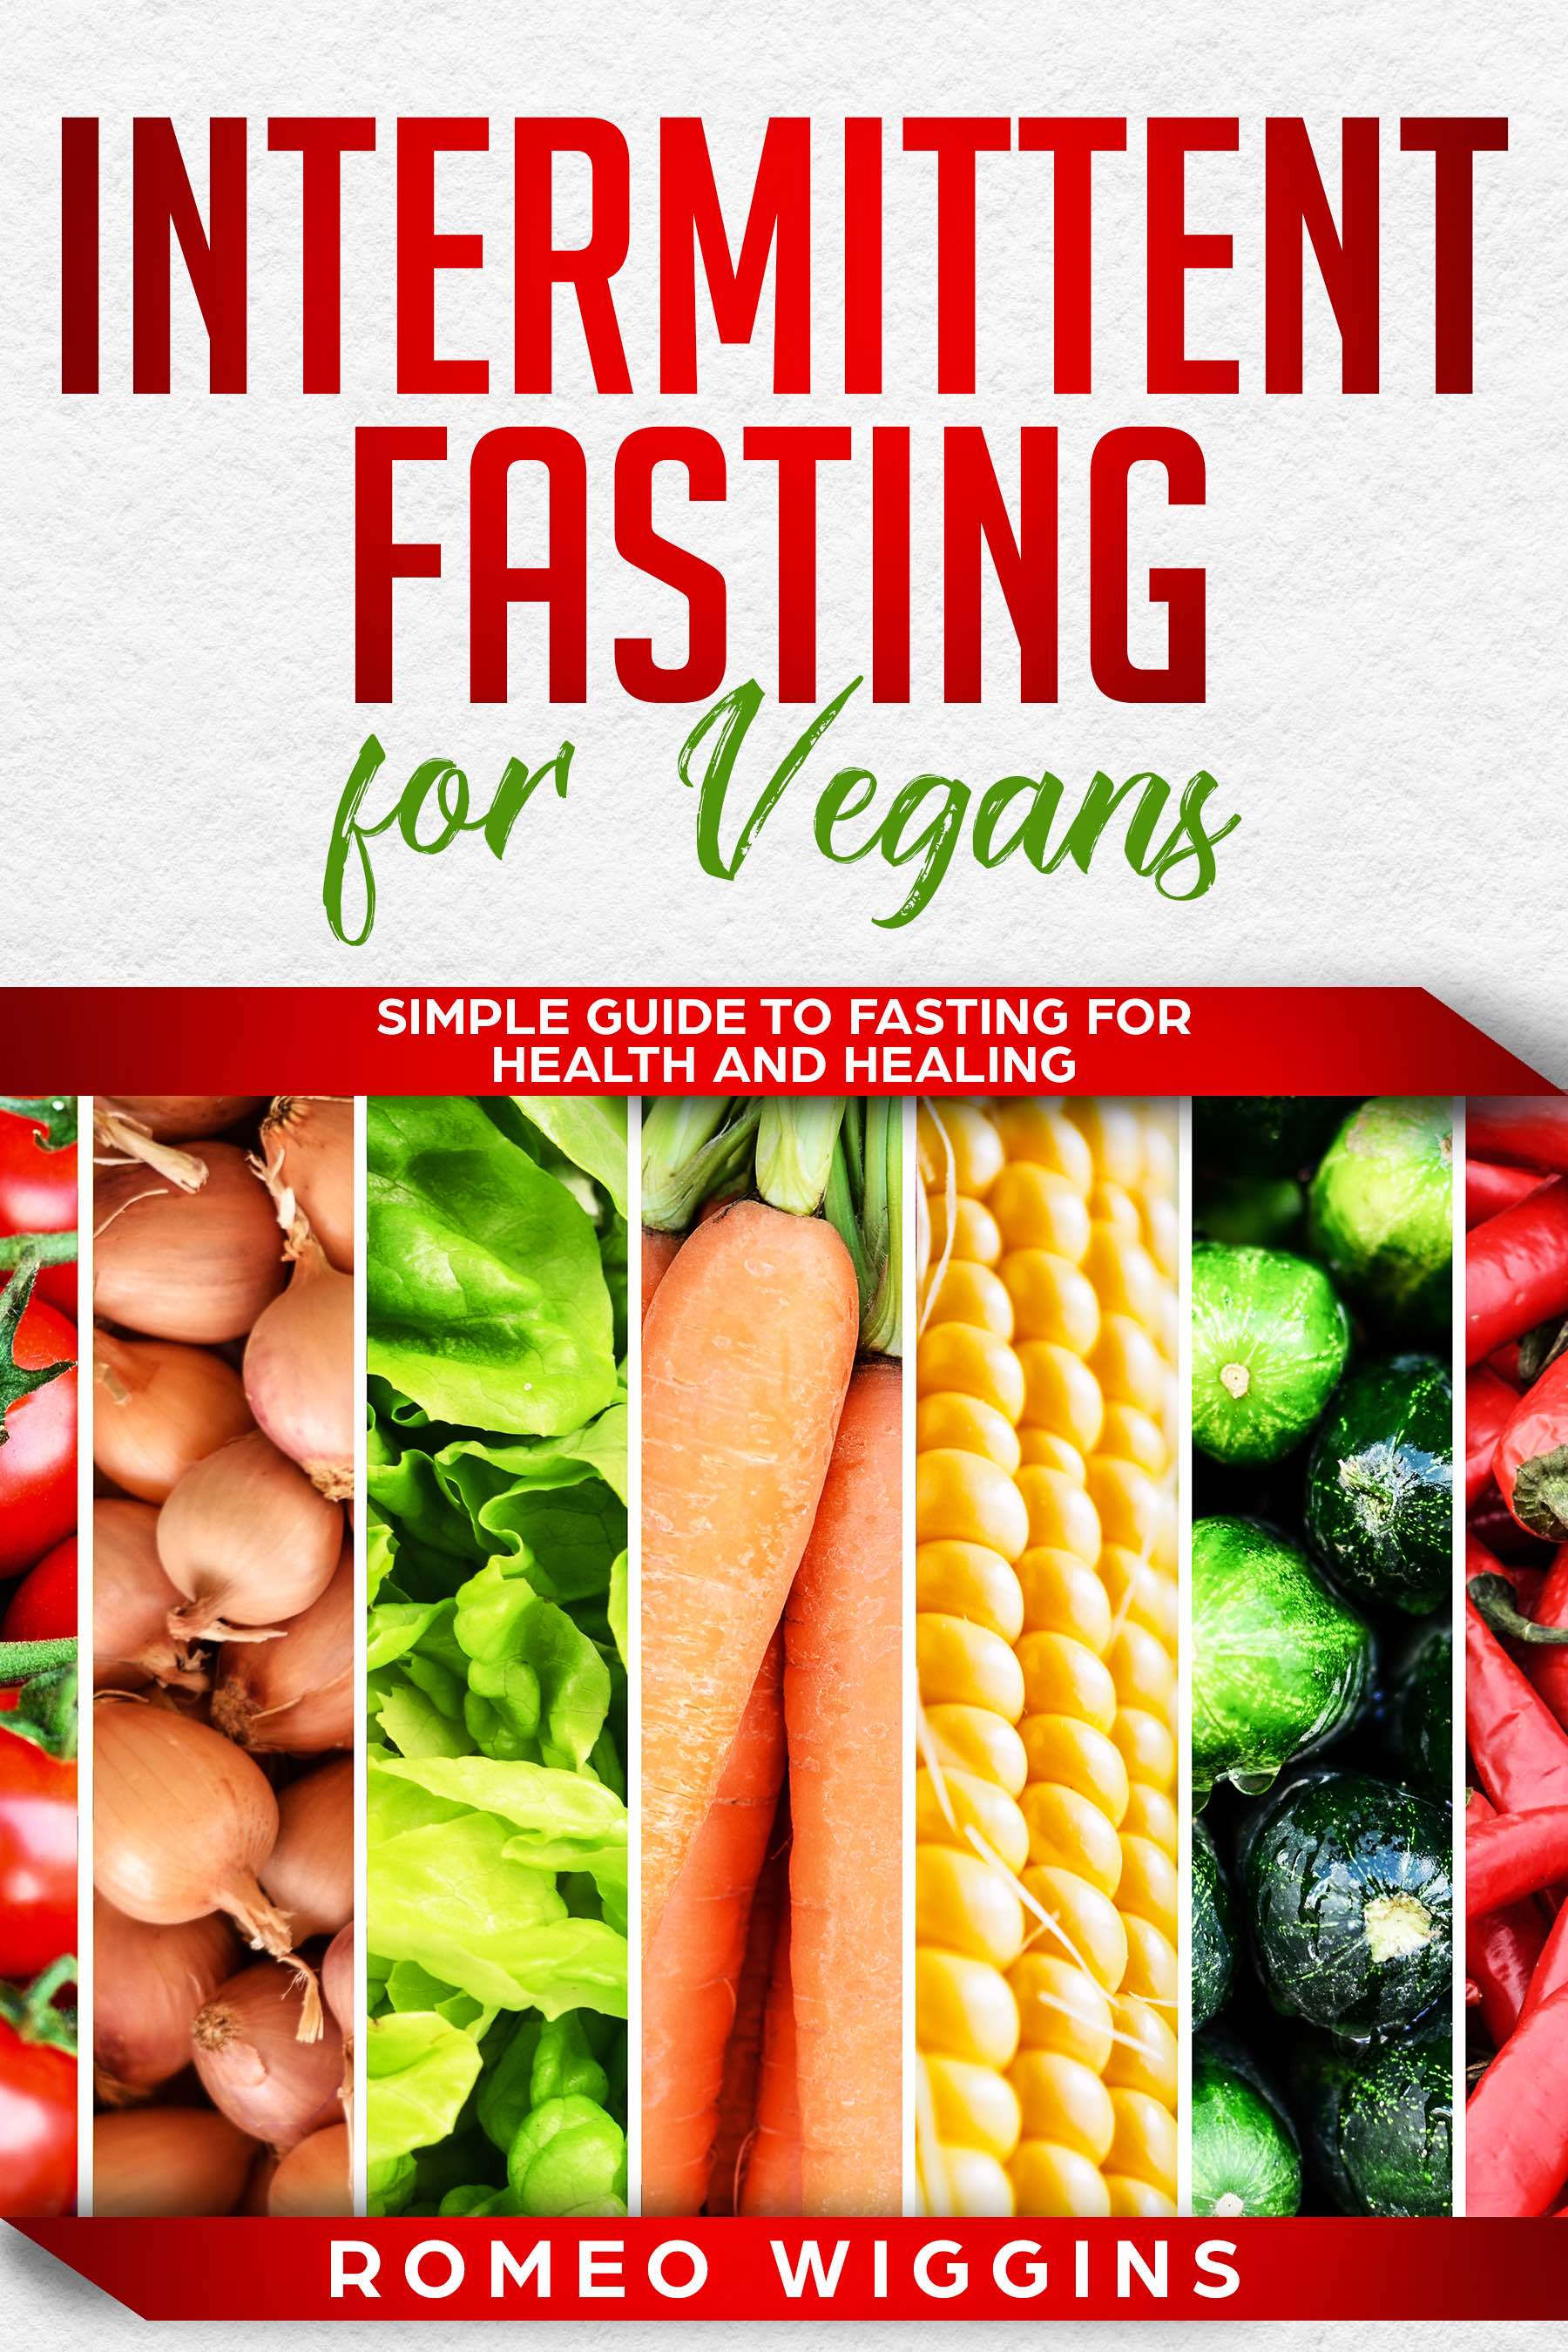 FREE: Intermittent Fasting for Vegans: Simple Guide to Fasting for Health and Healing by Romeo Wiggins